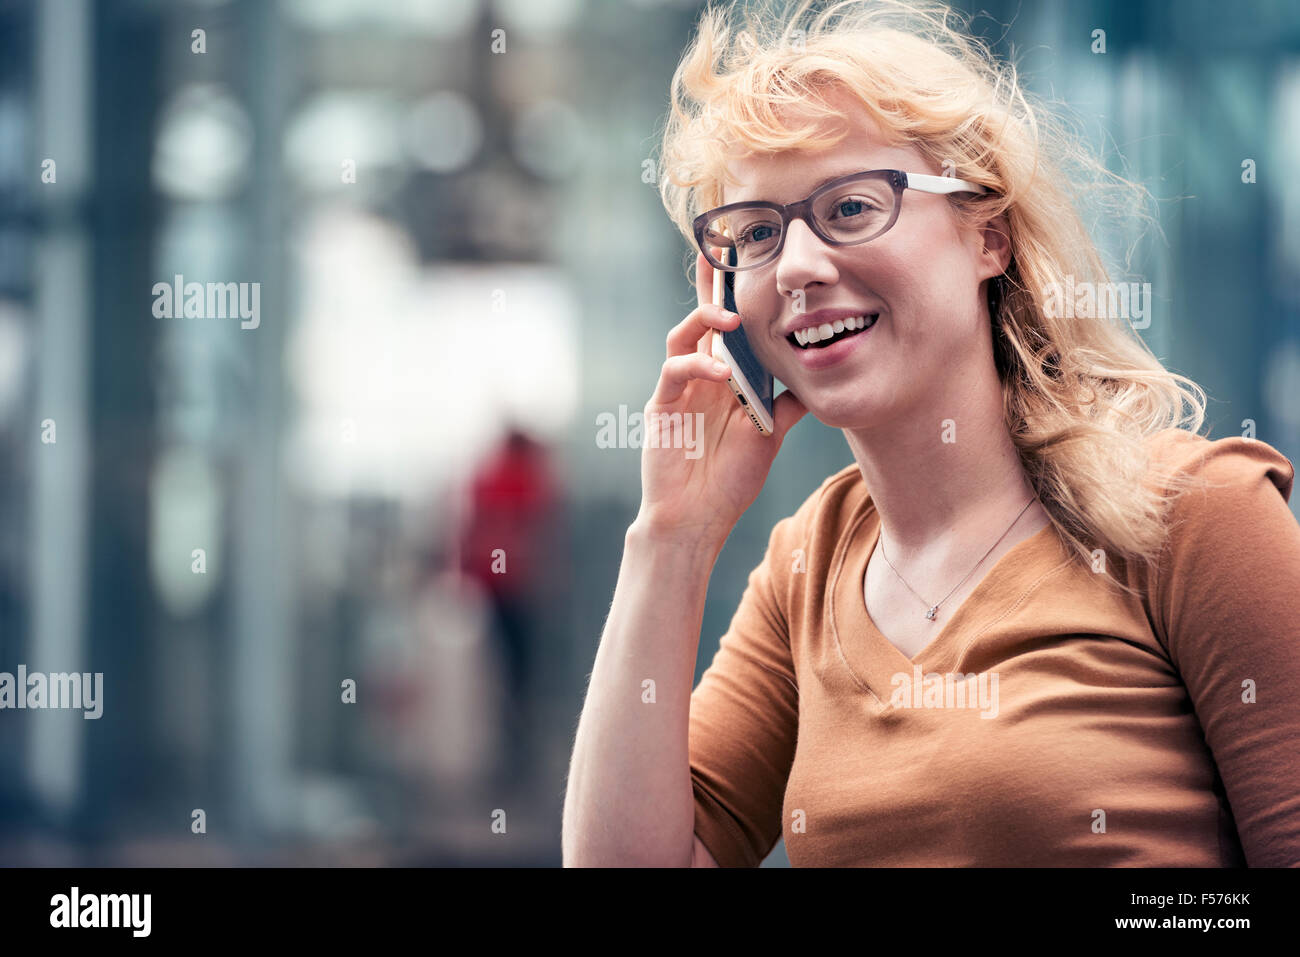 A blond woman talking on a cell phone on a street in the city Stock Photo